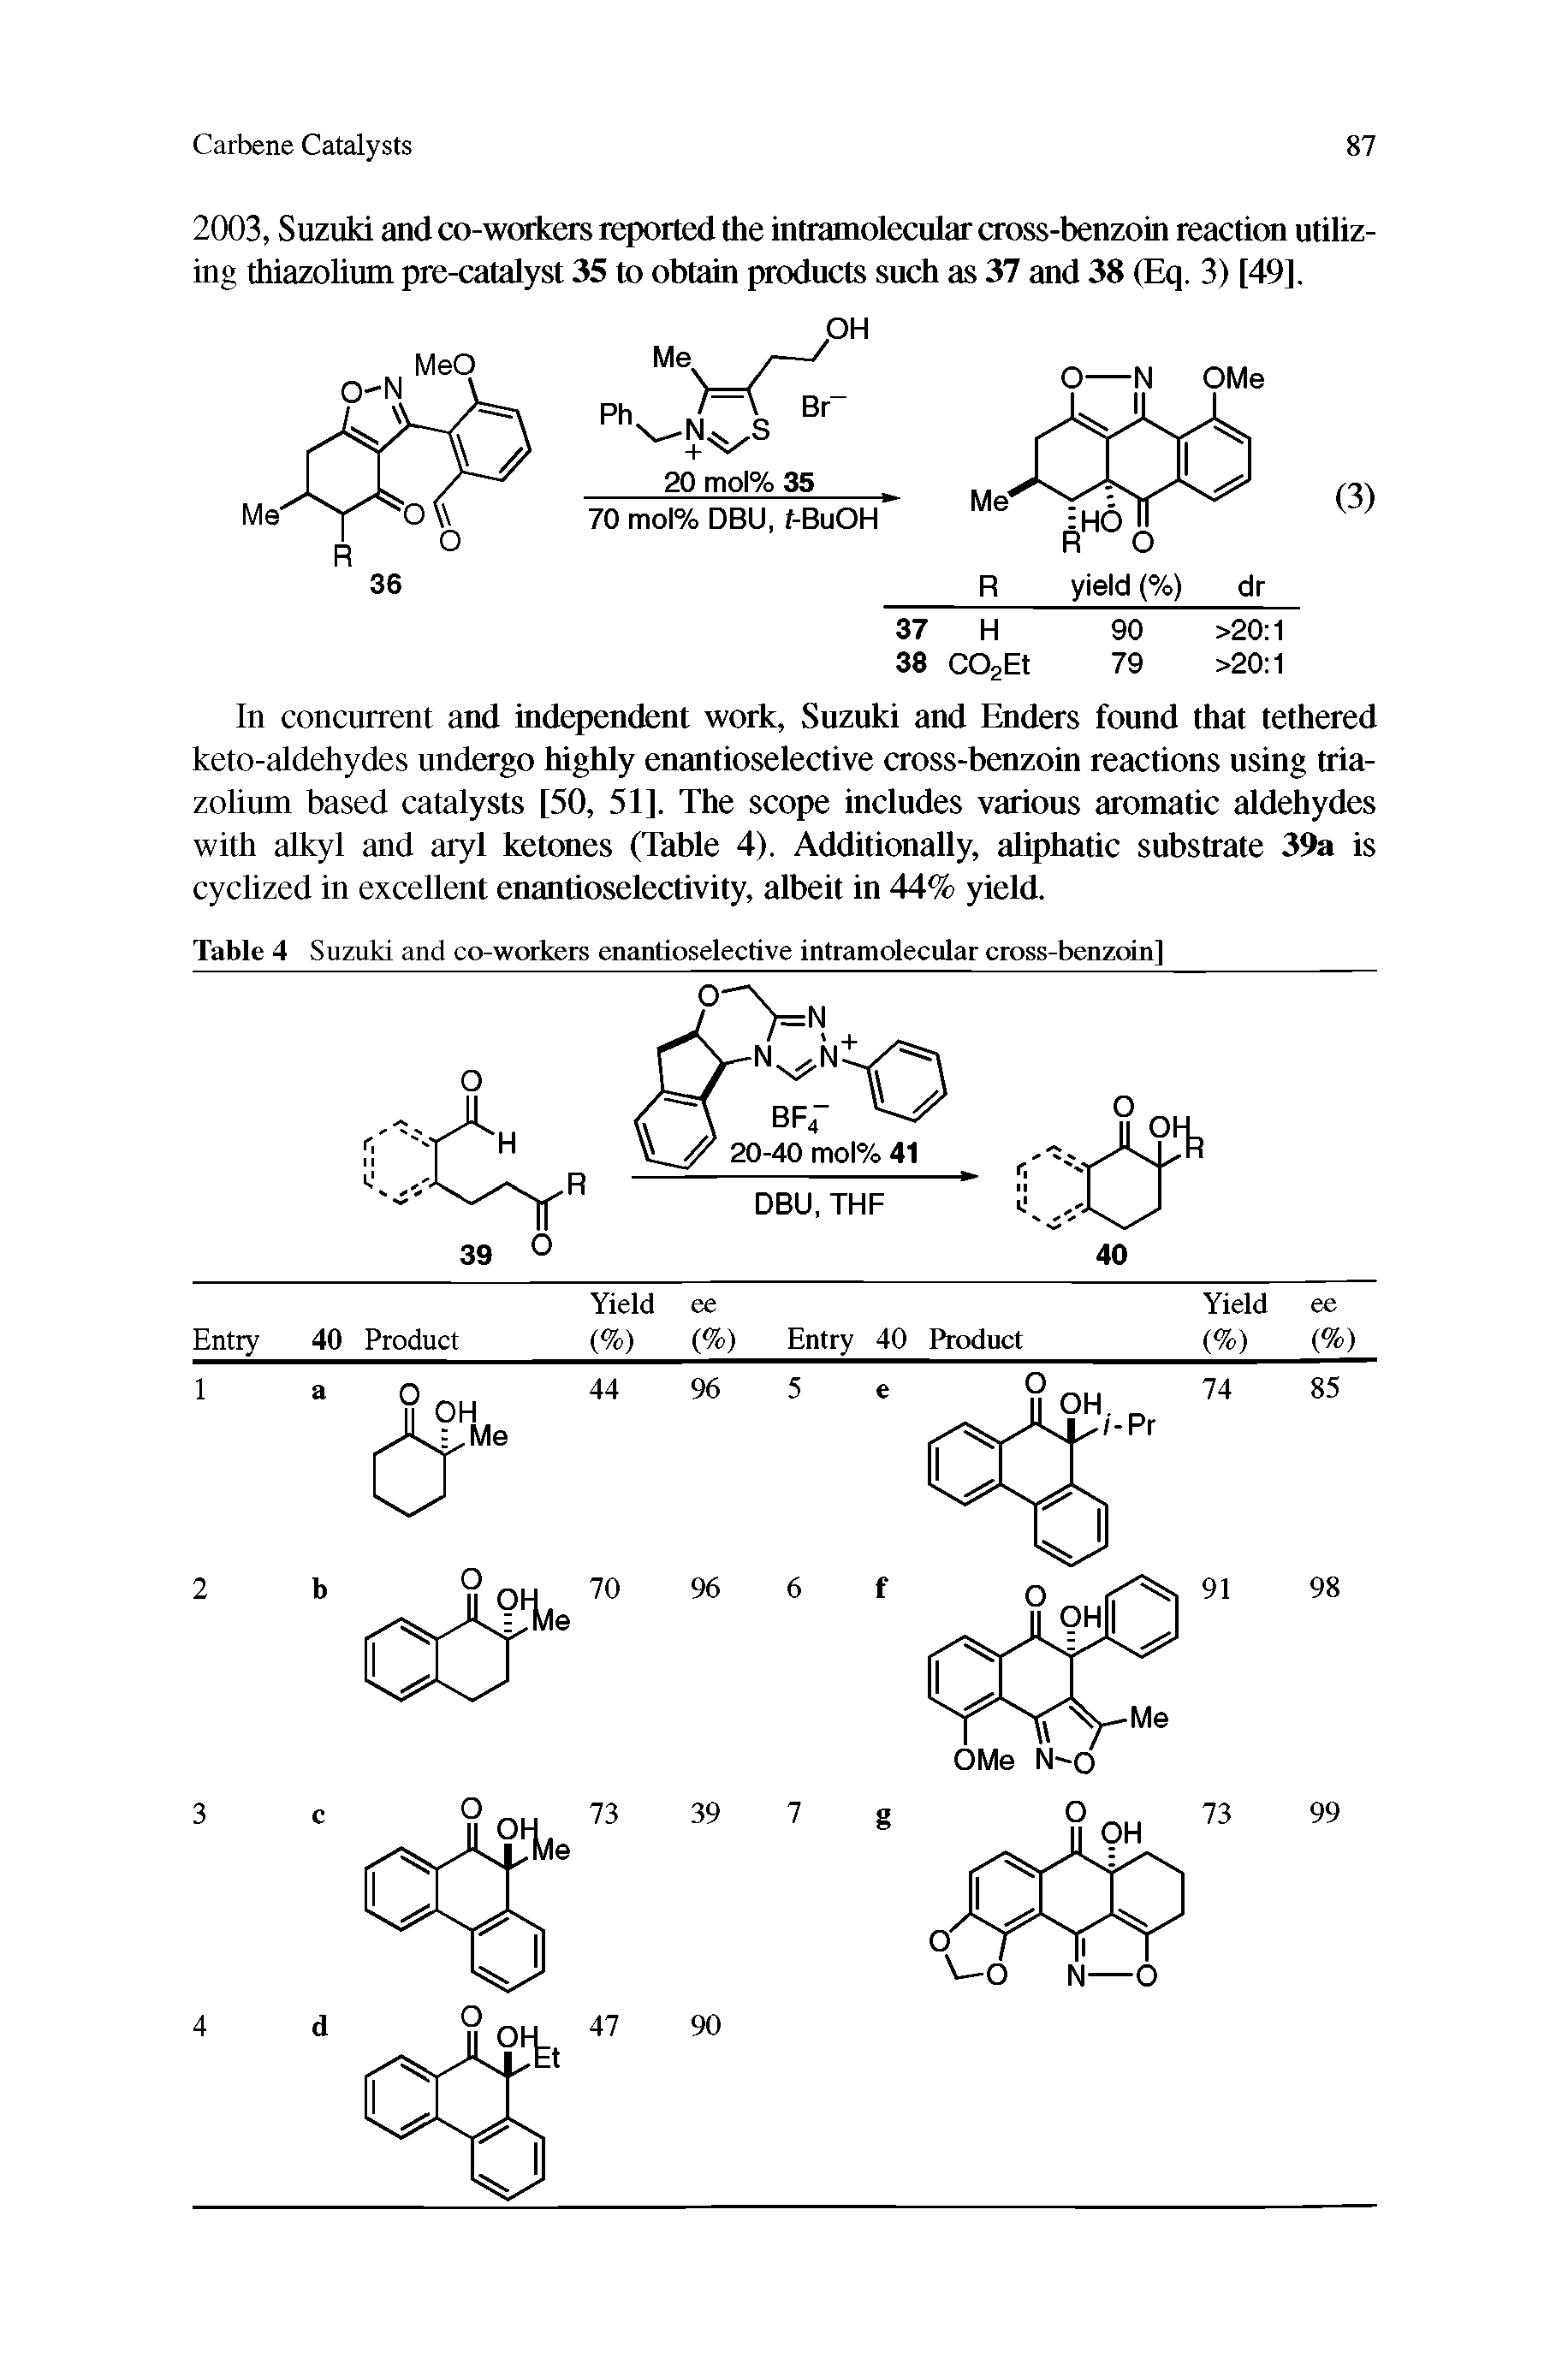 Table 4 Suzuki and co-workers enantioselective intramolecular cross-benzoin]...